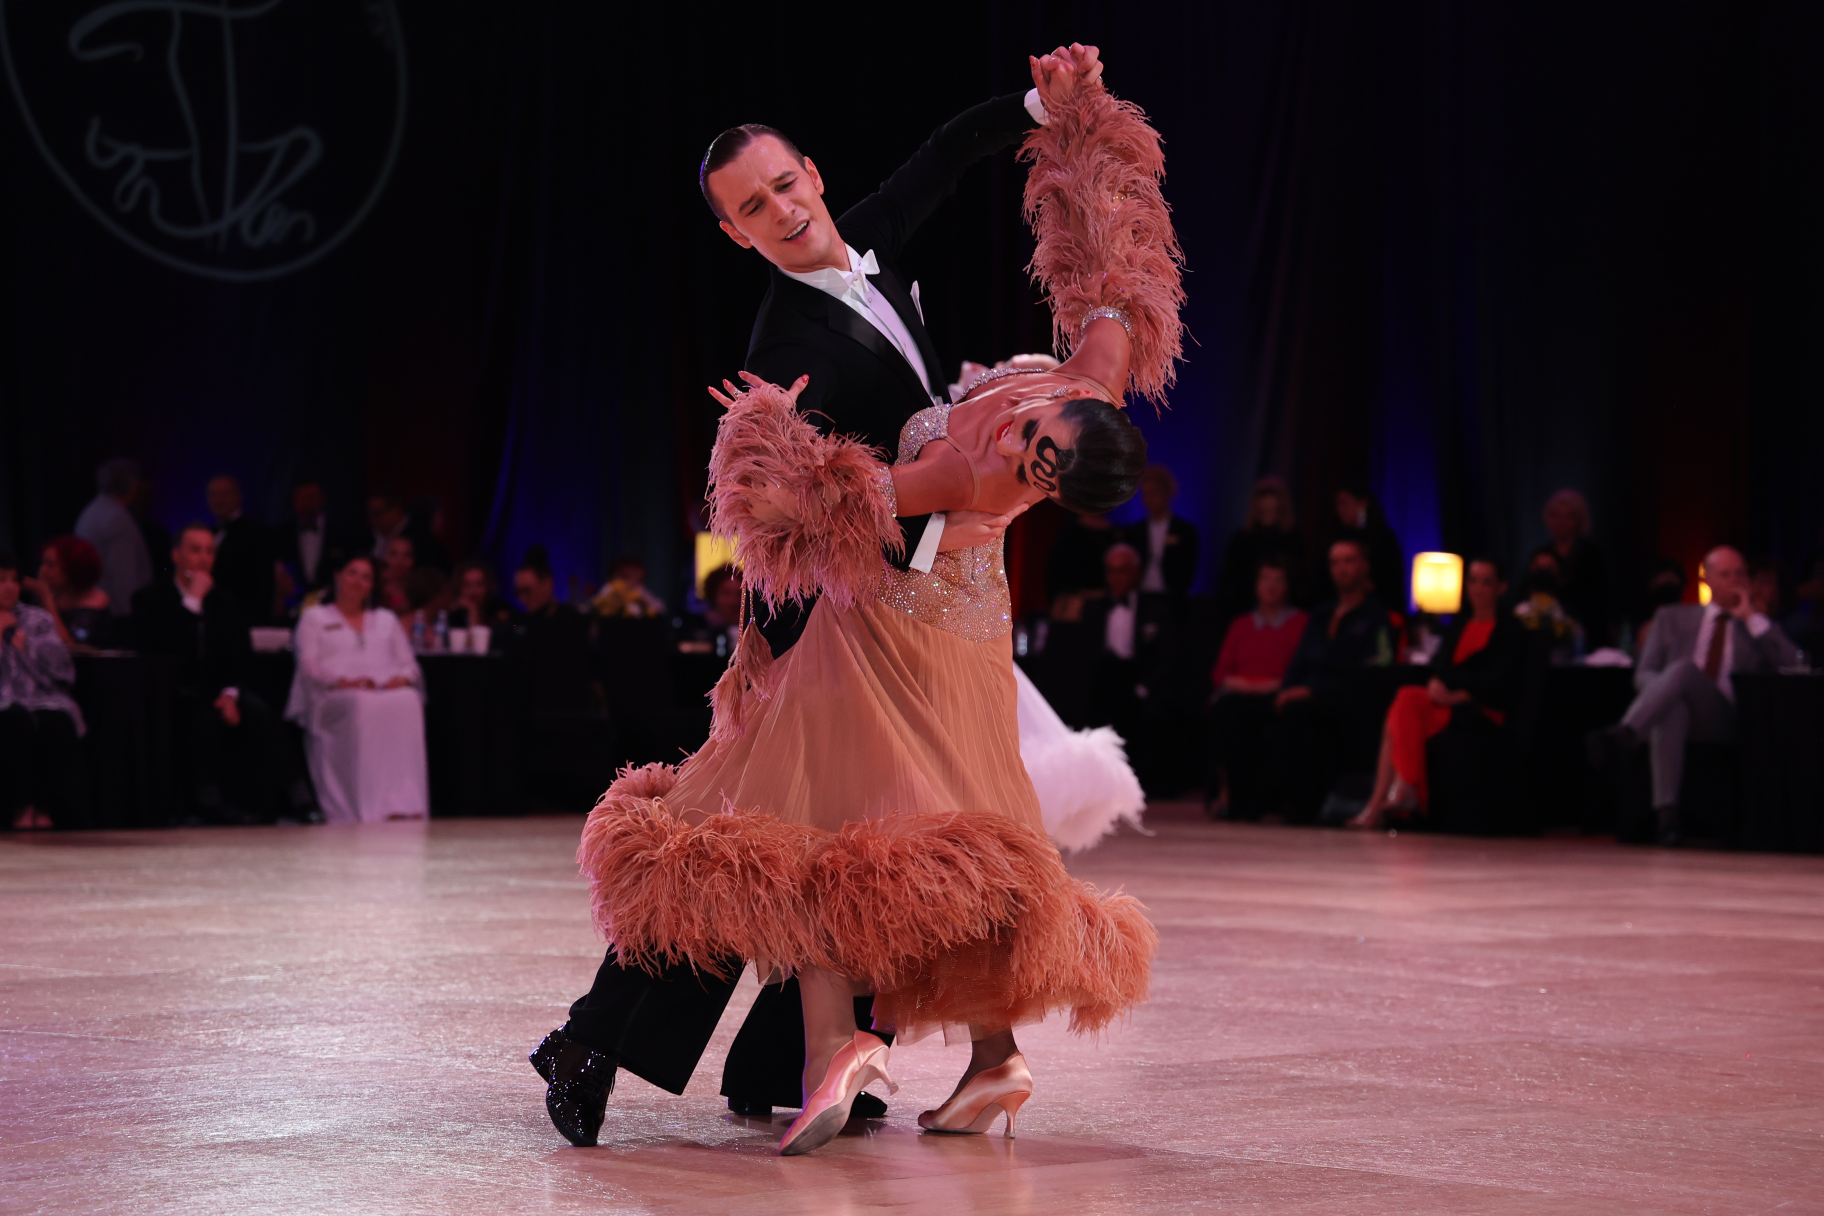 Image for the blog: The 19 Different Types of Ballroom Dance